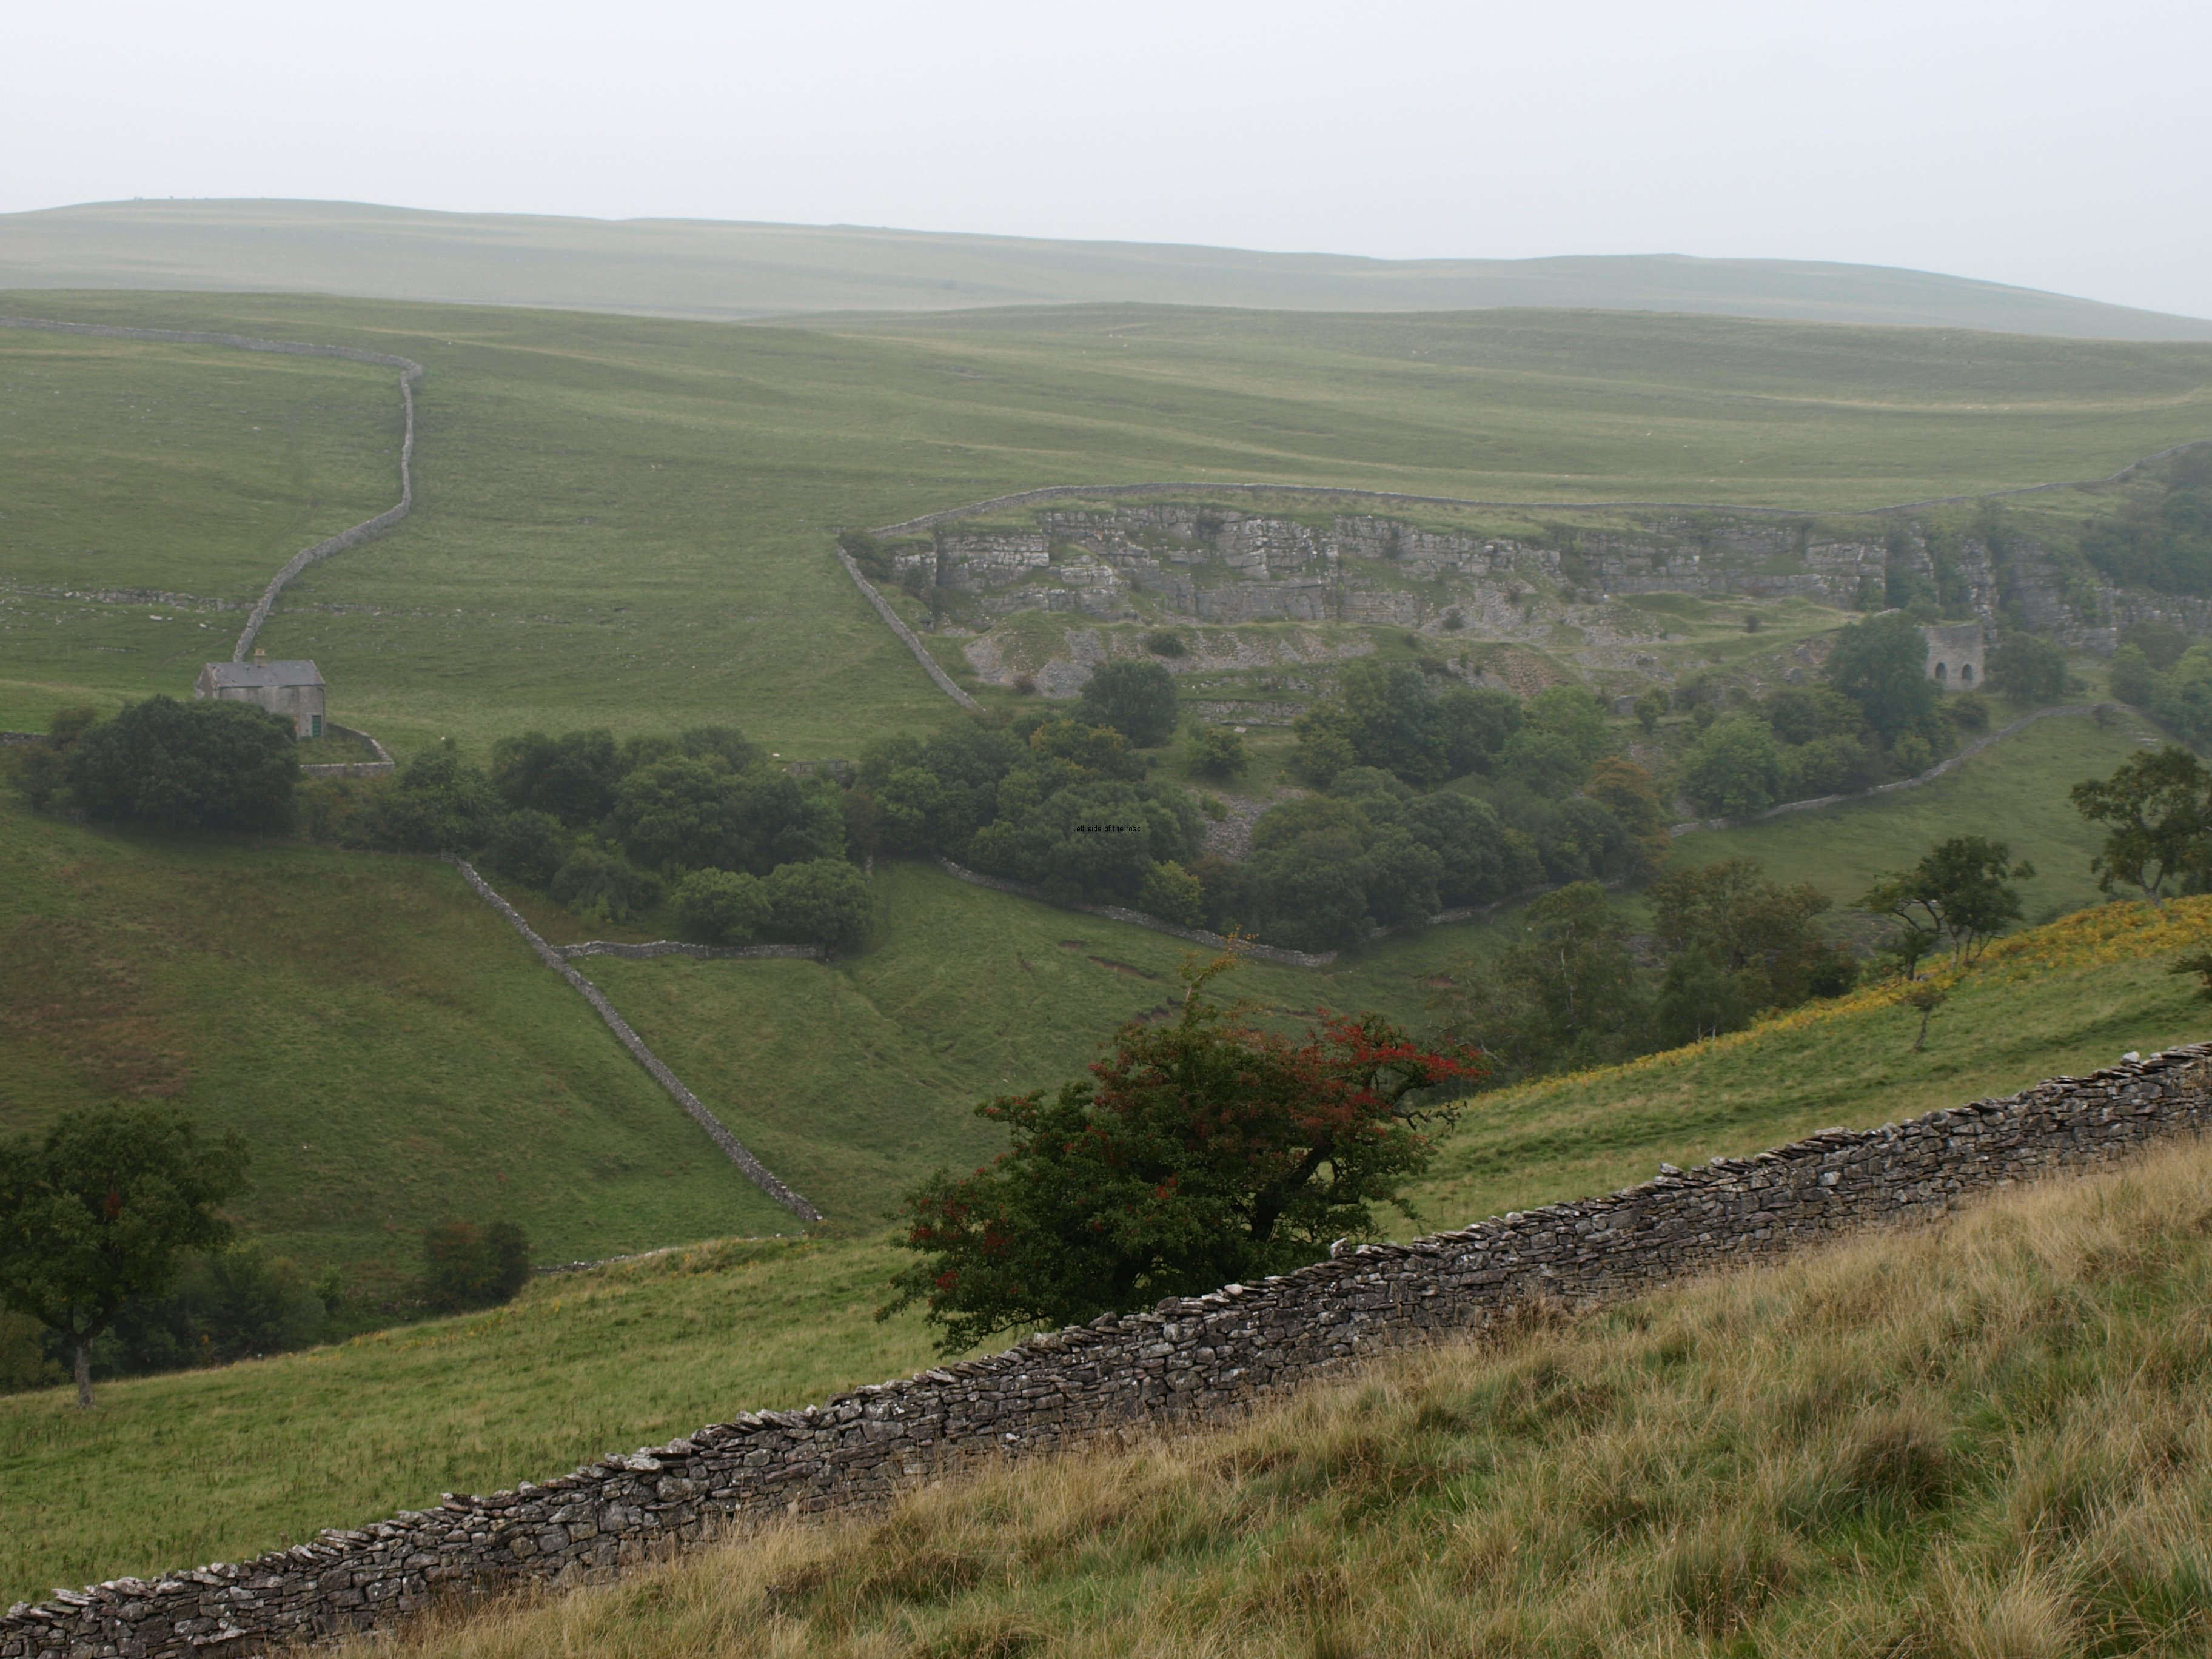 Shap to Kirkby Stephen